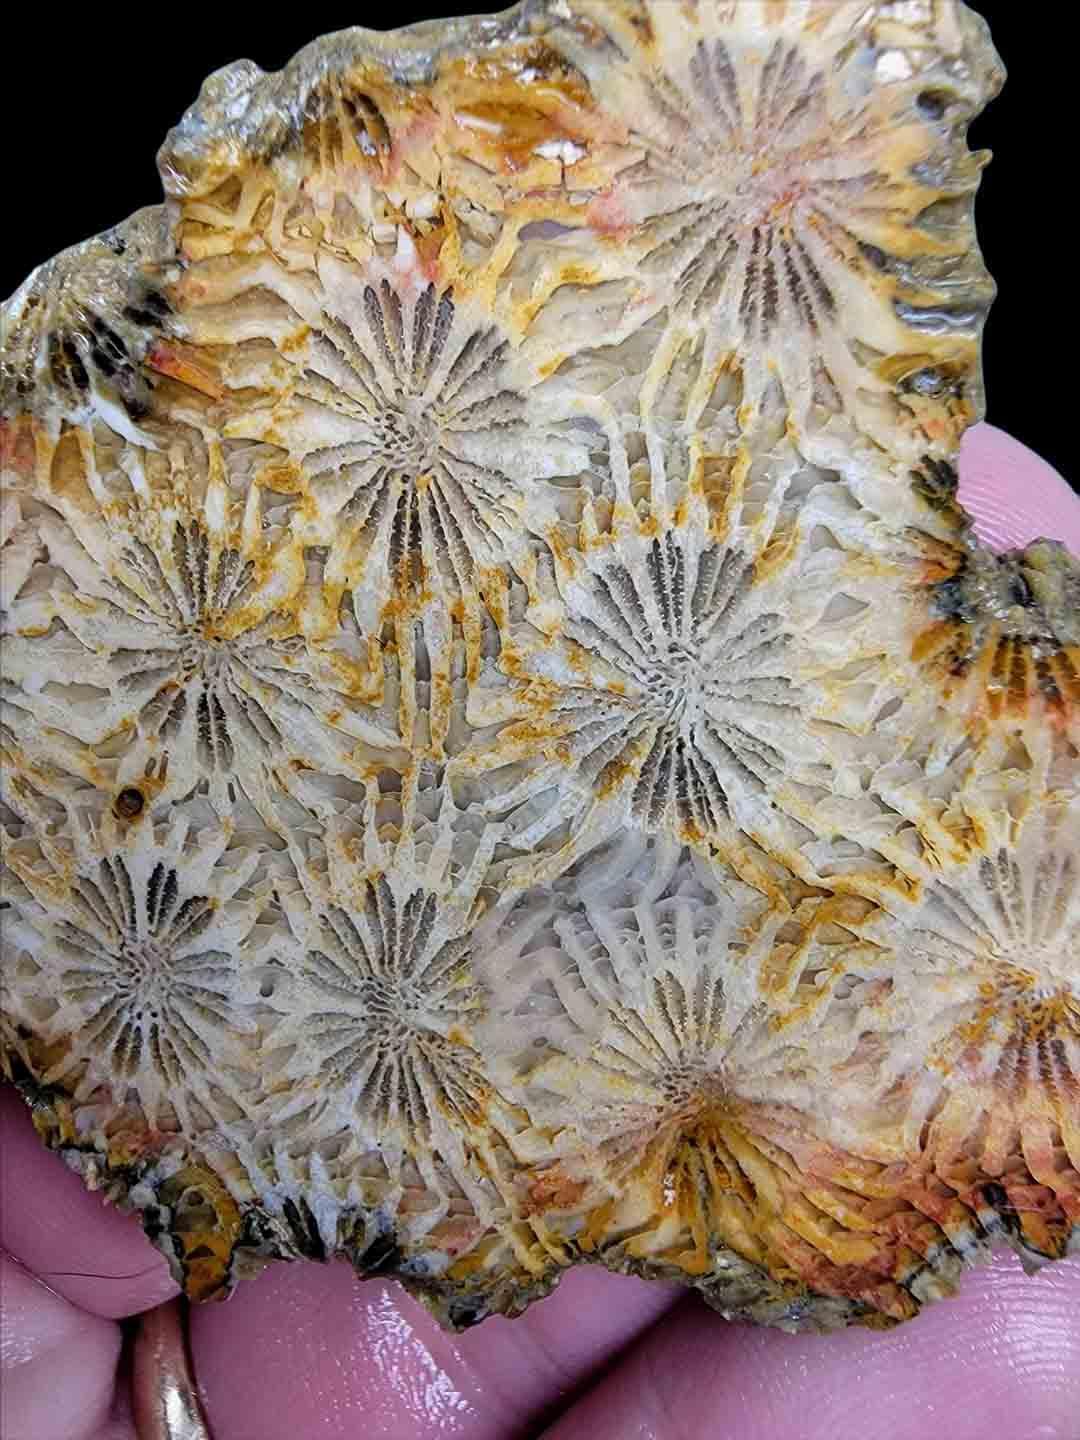 Indonesian Fossil Coral Slab!  Lapidary Stone Slab! - LapidaryCentral